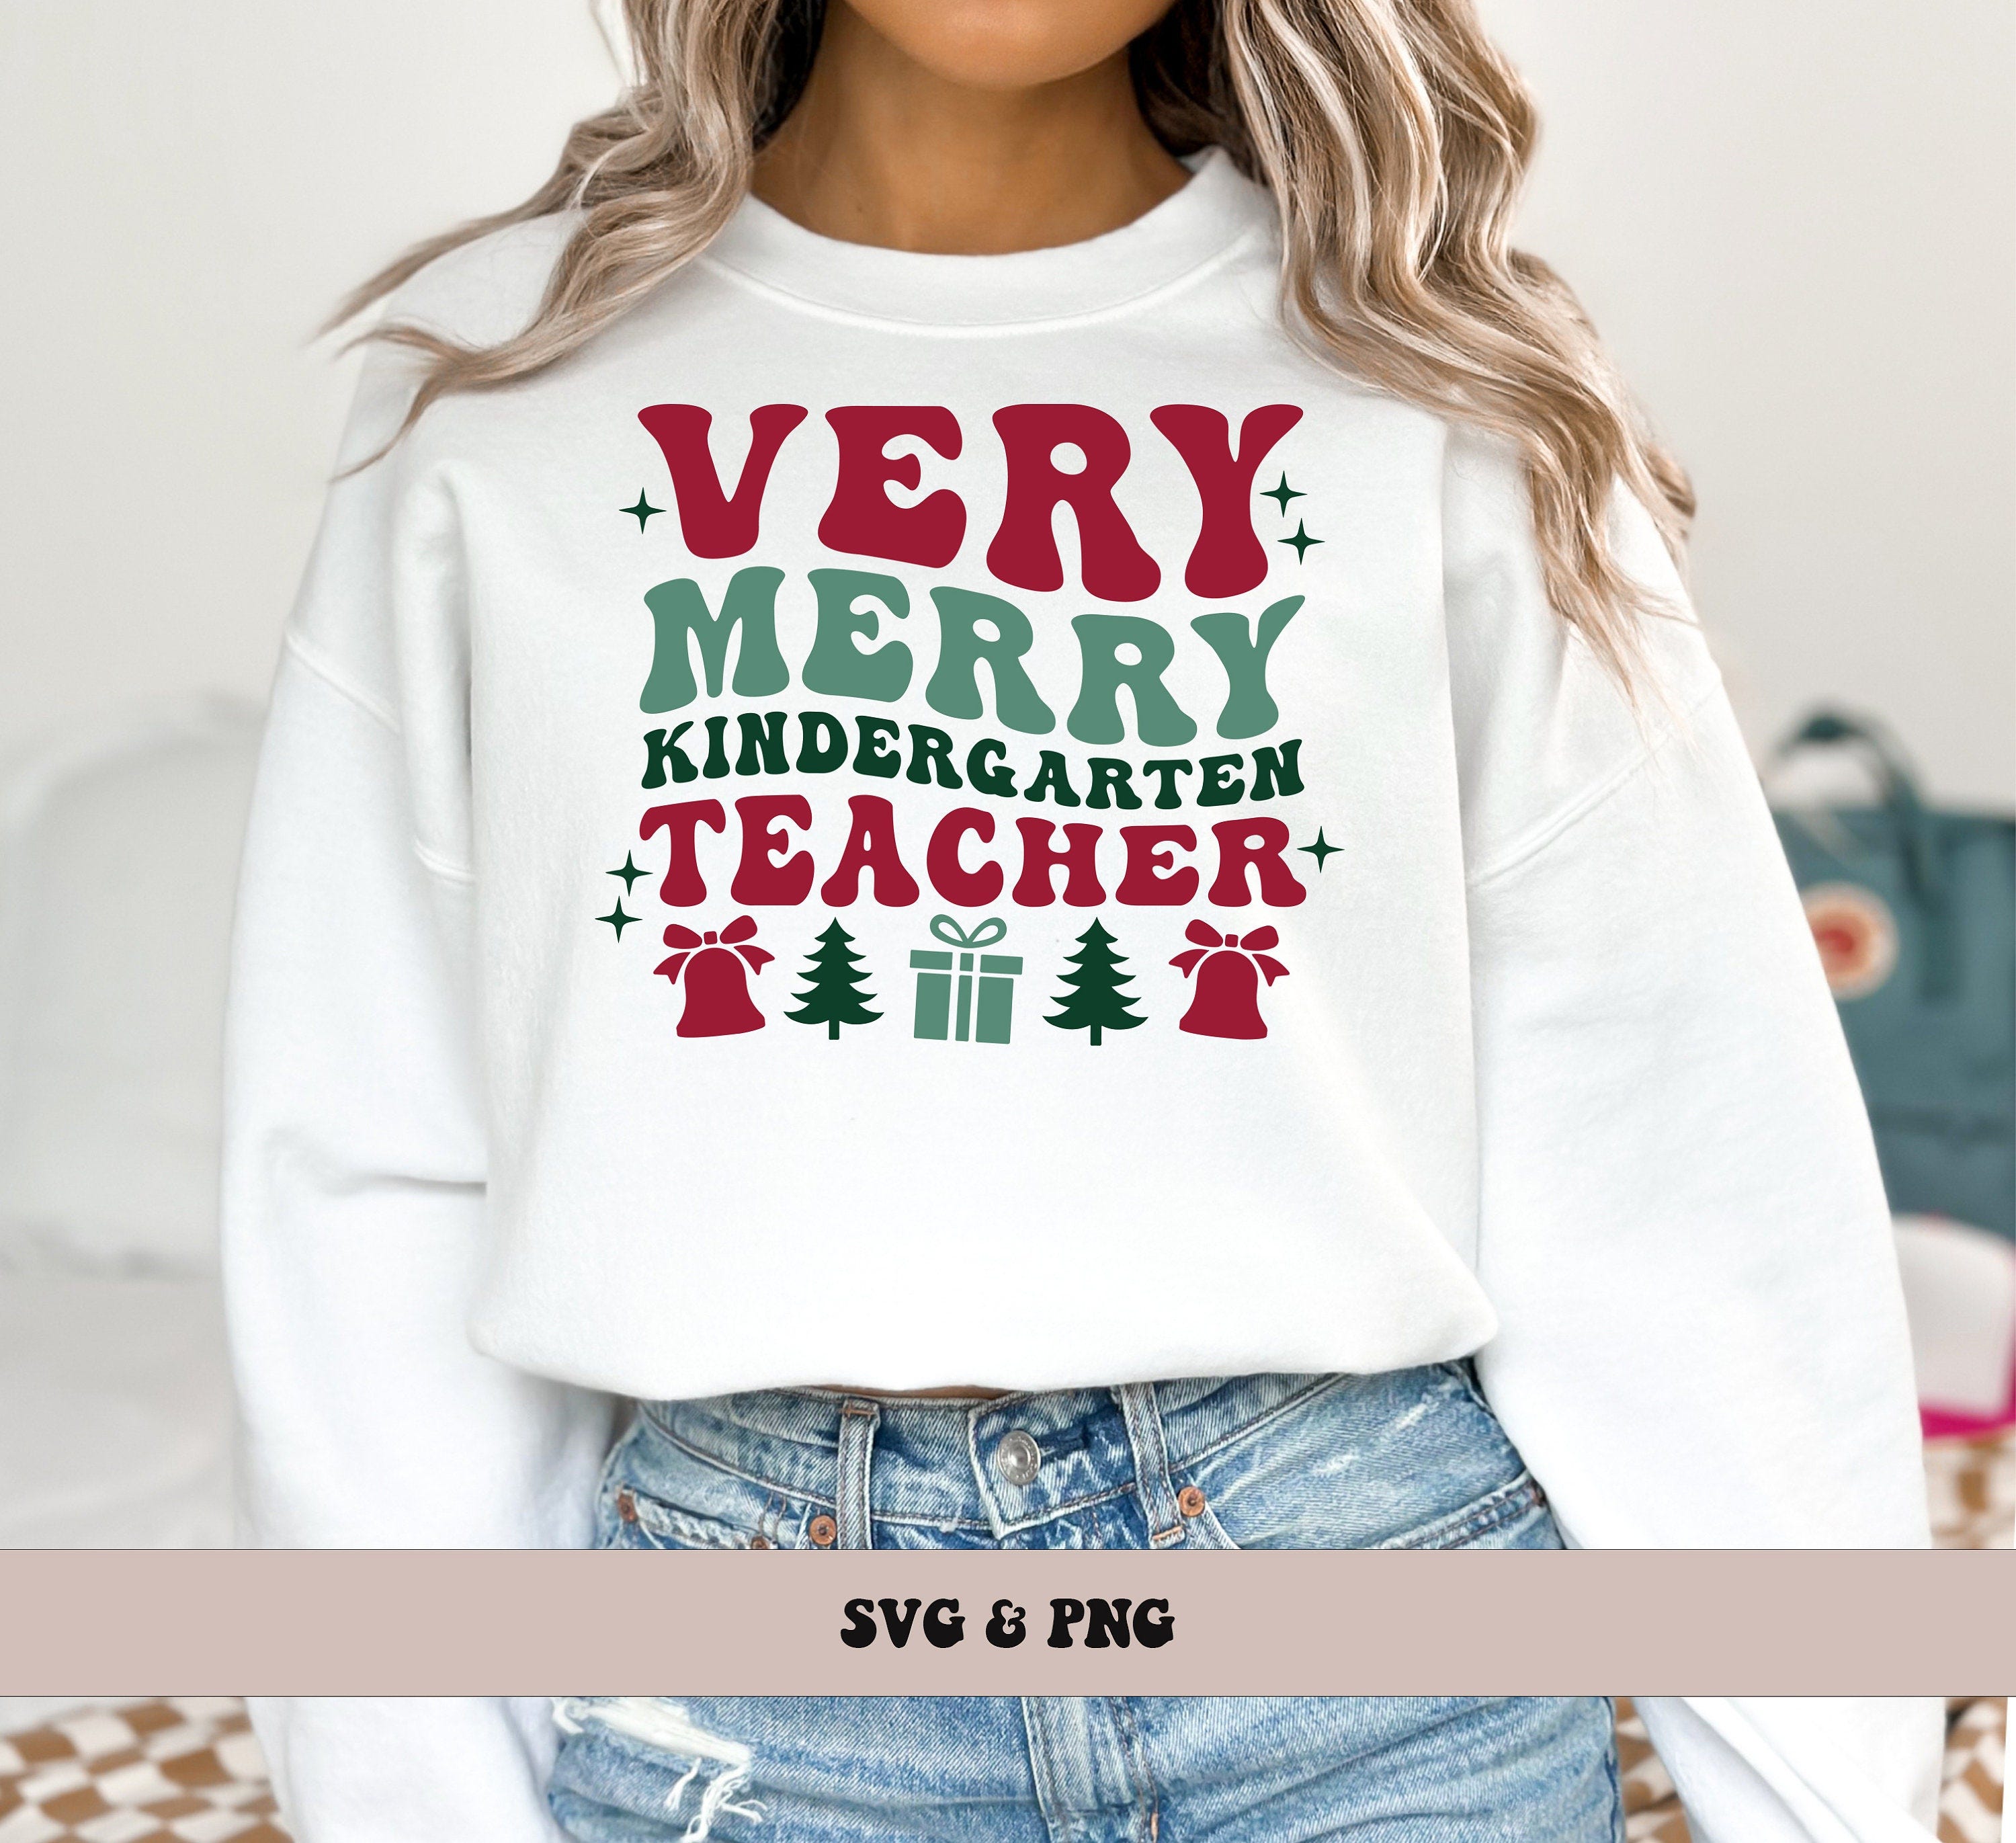 Very Merry Kindergarten Teacher SVG and PNG Christmas Holidays Groovy Kindergarten Teacher Christmas SVG and png